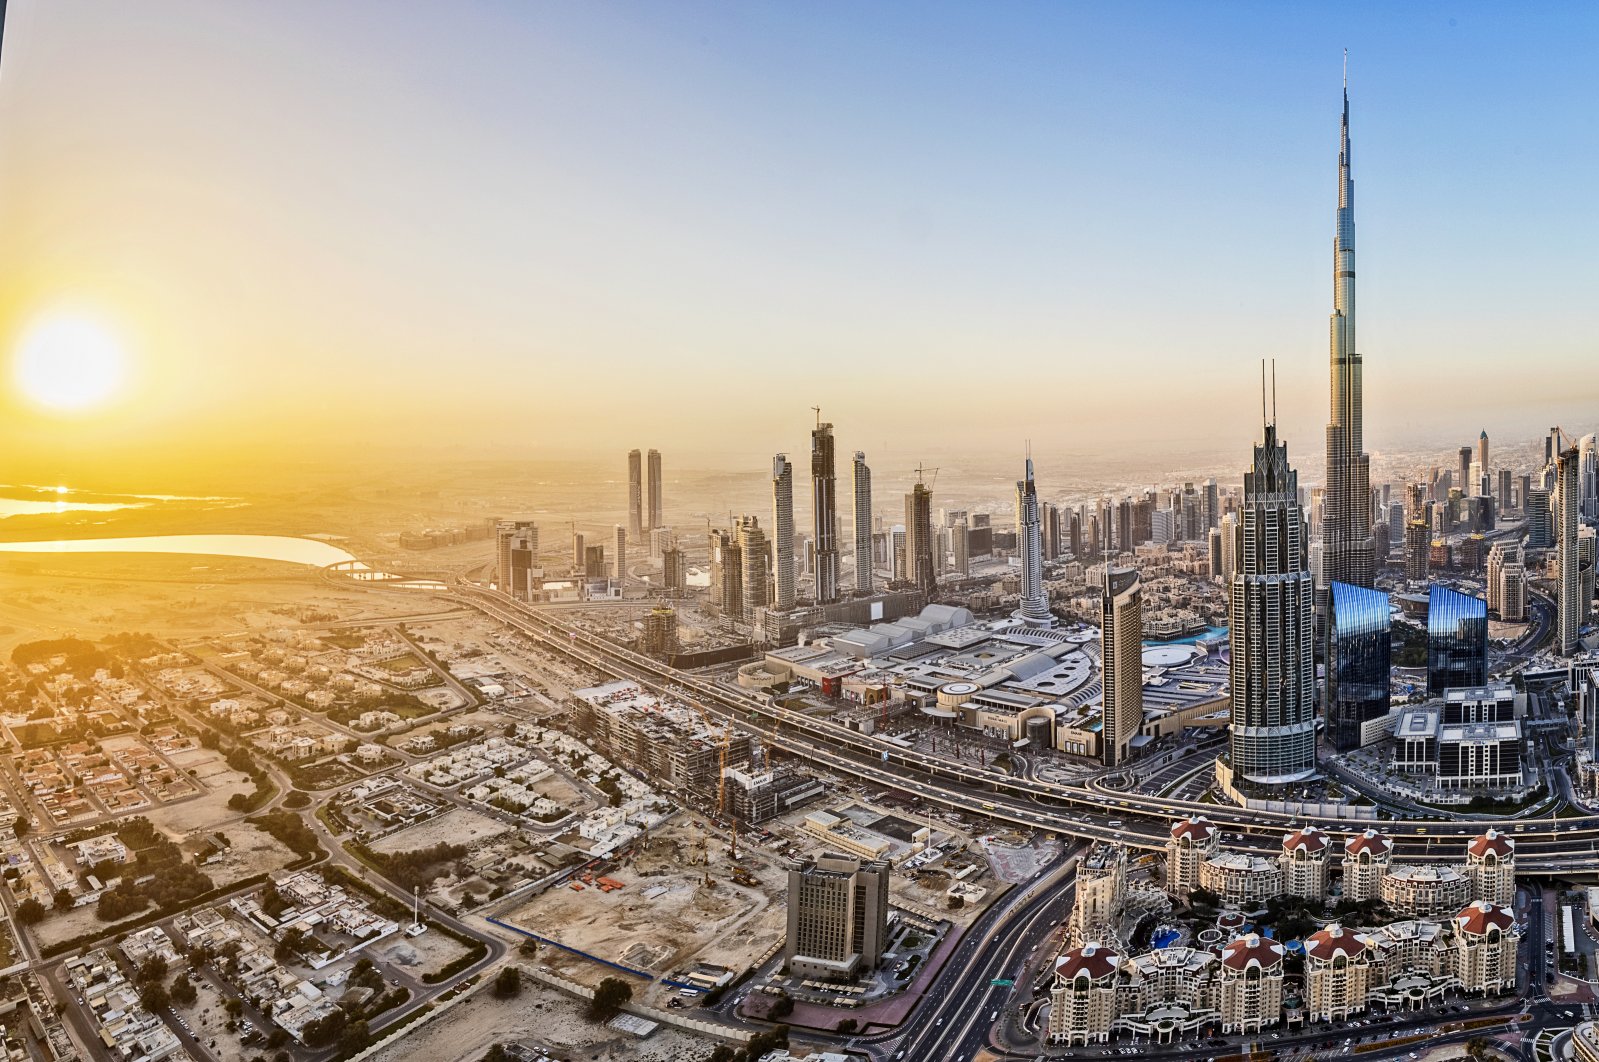 A general view of sunset in Dubai, United Arab Emirates, Dec. 7, 2021. (Getty Images)